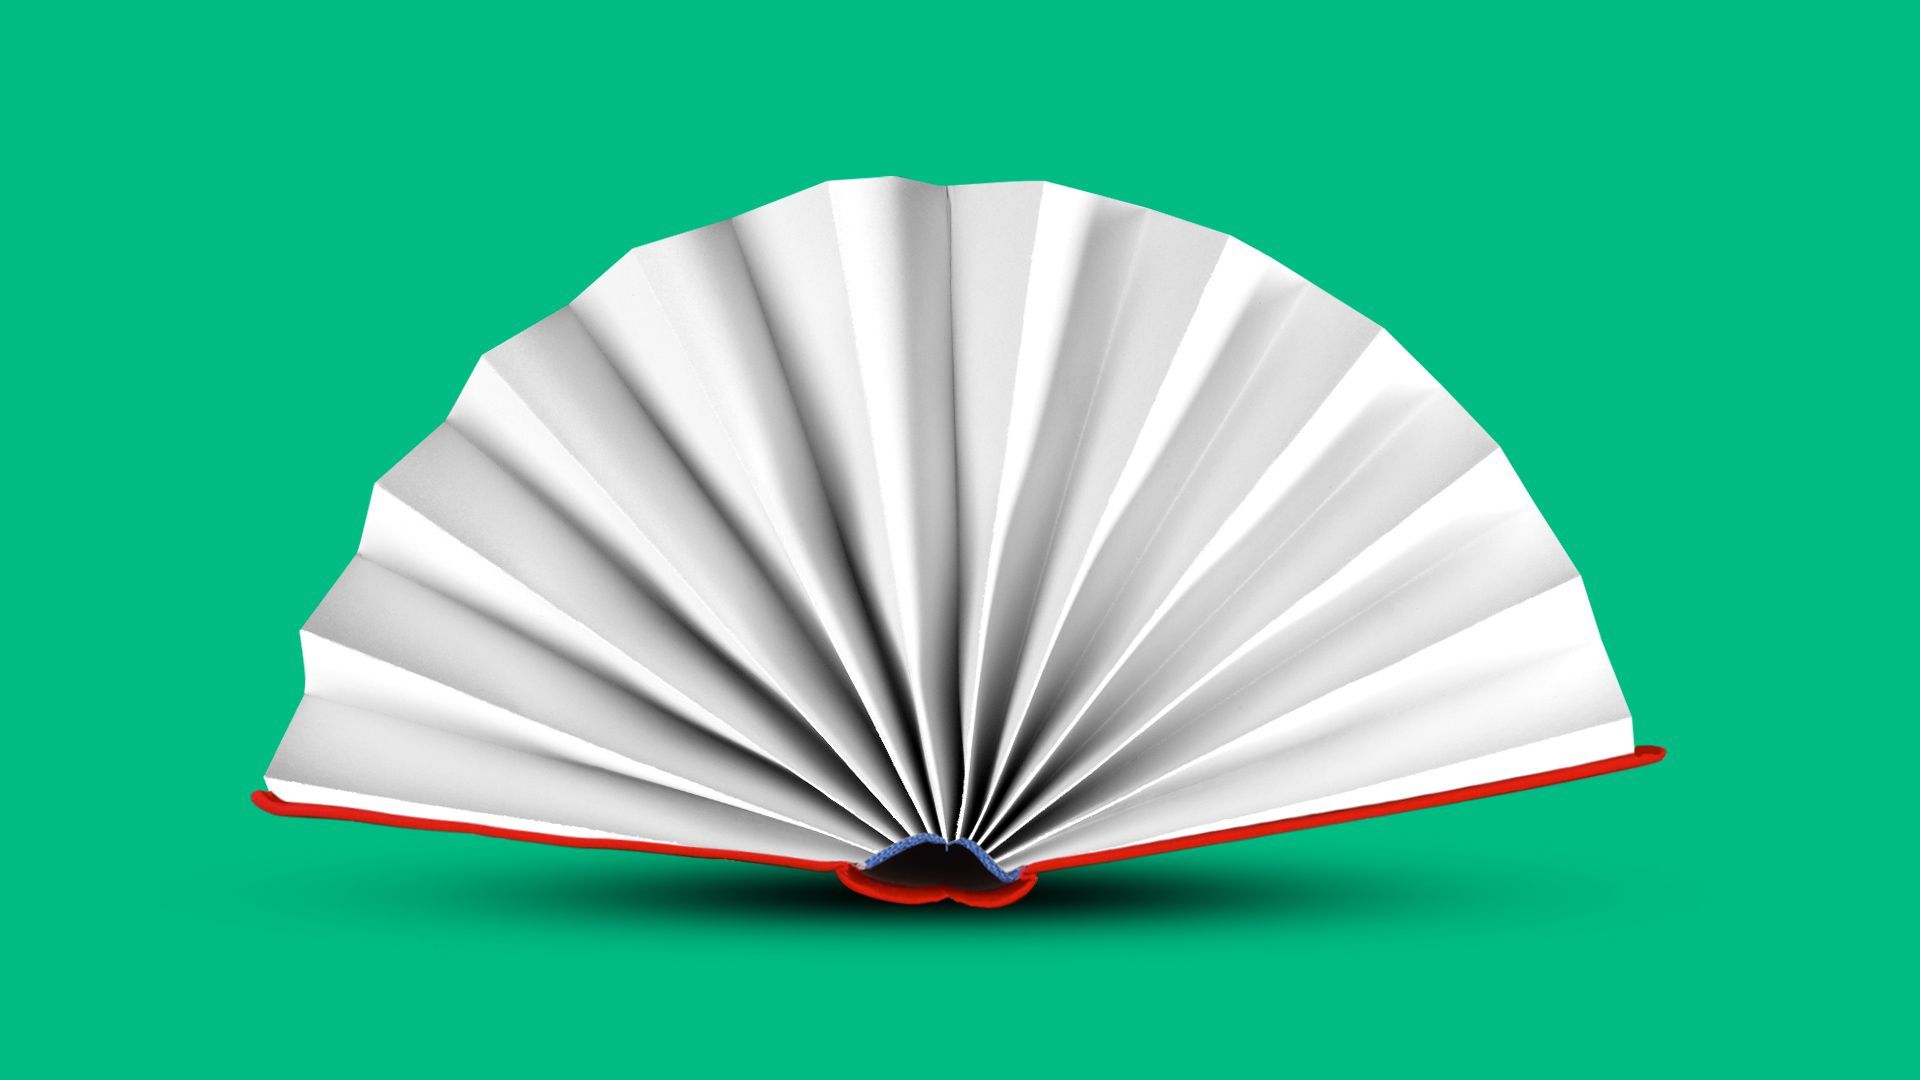 Illustration of book opening up to reveal a paper fan instead of pages.  